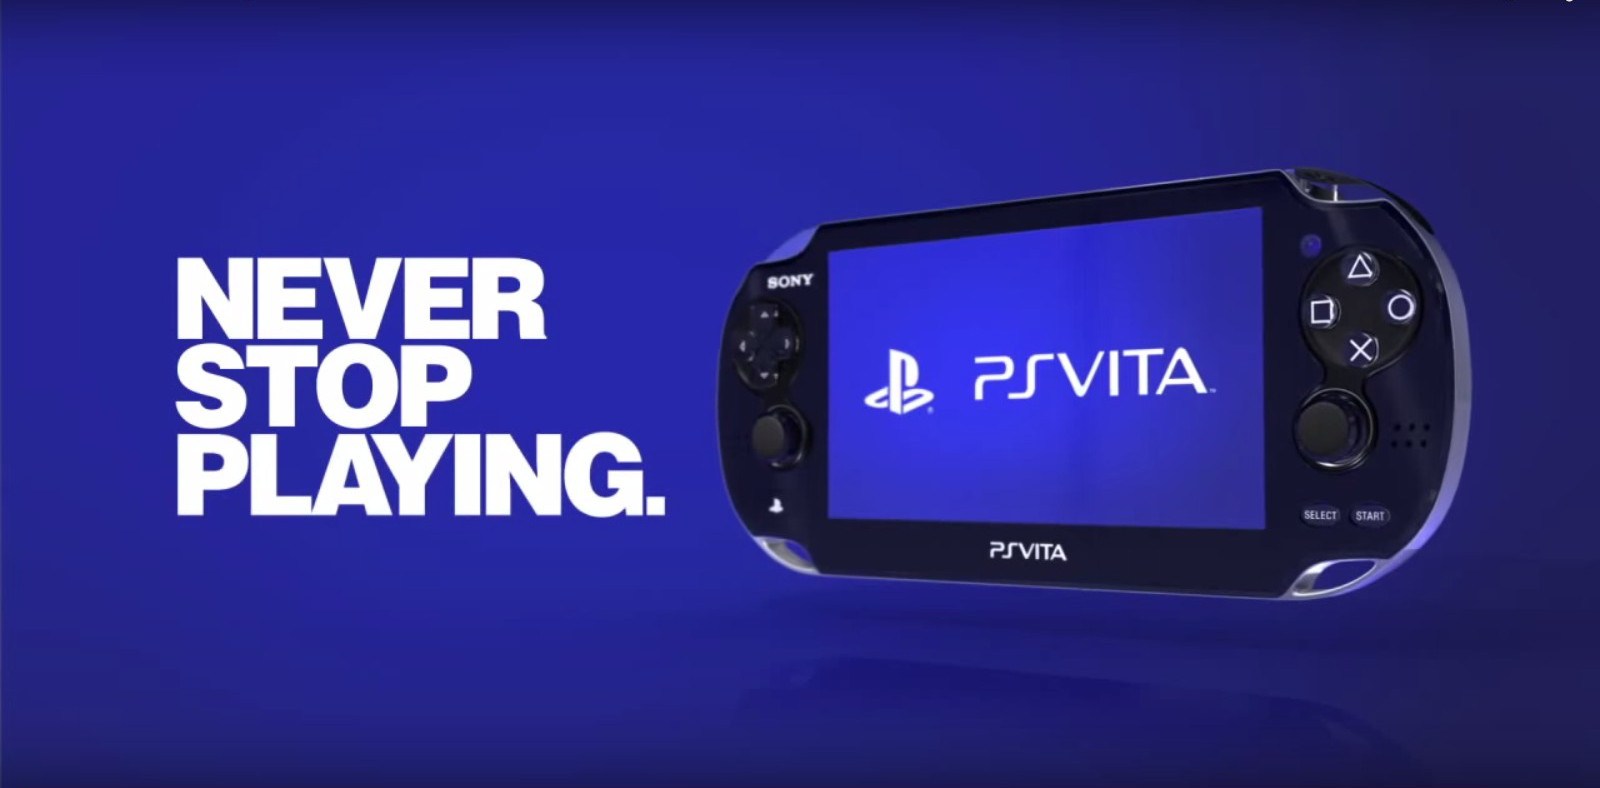 PS VITA - never stop playing